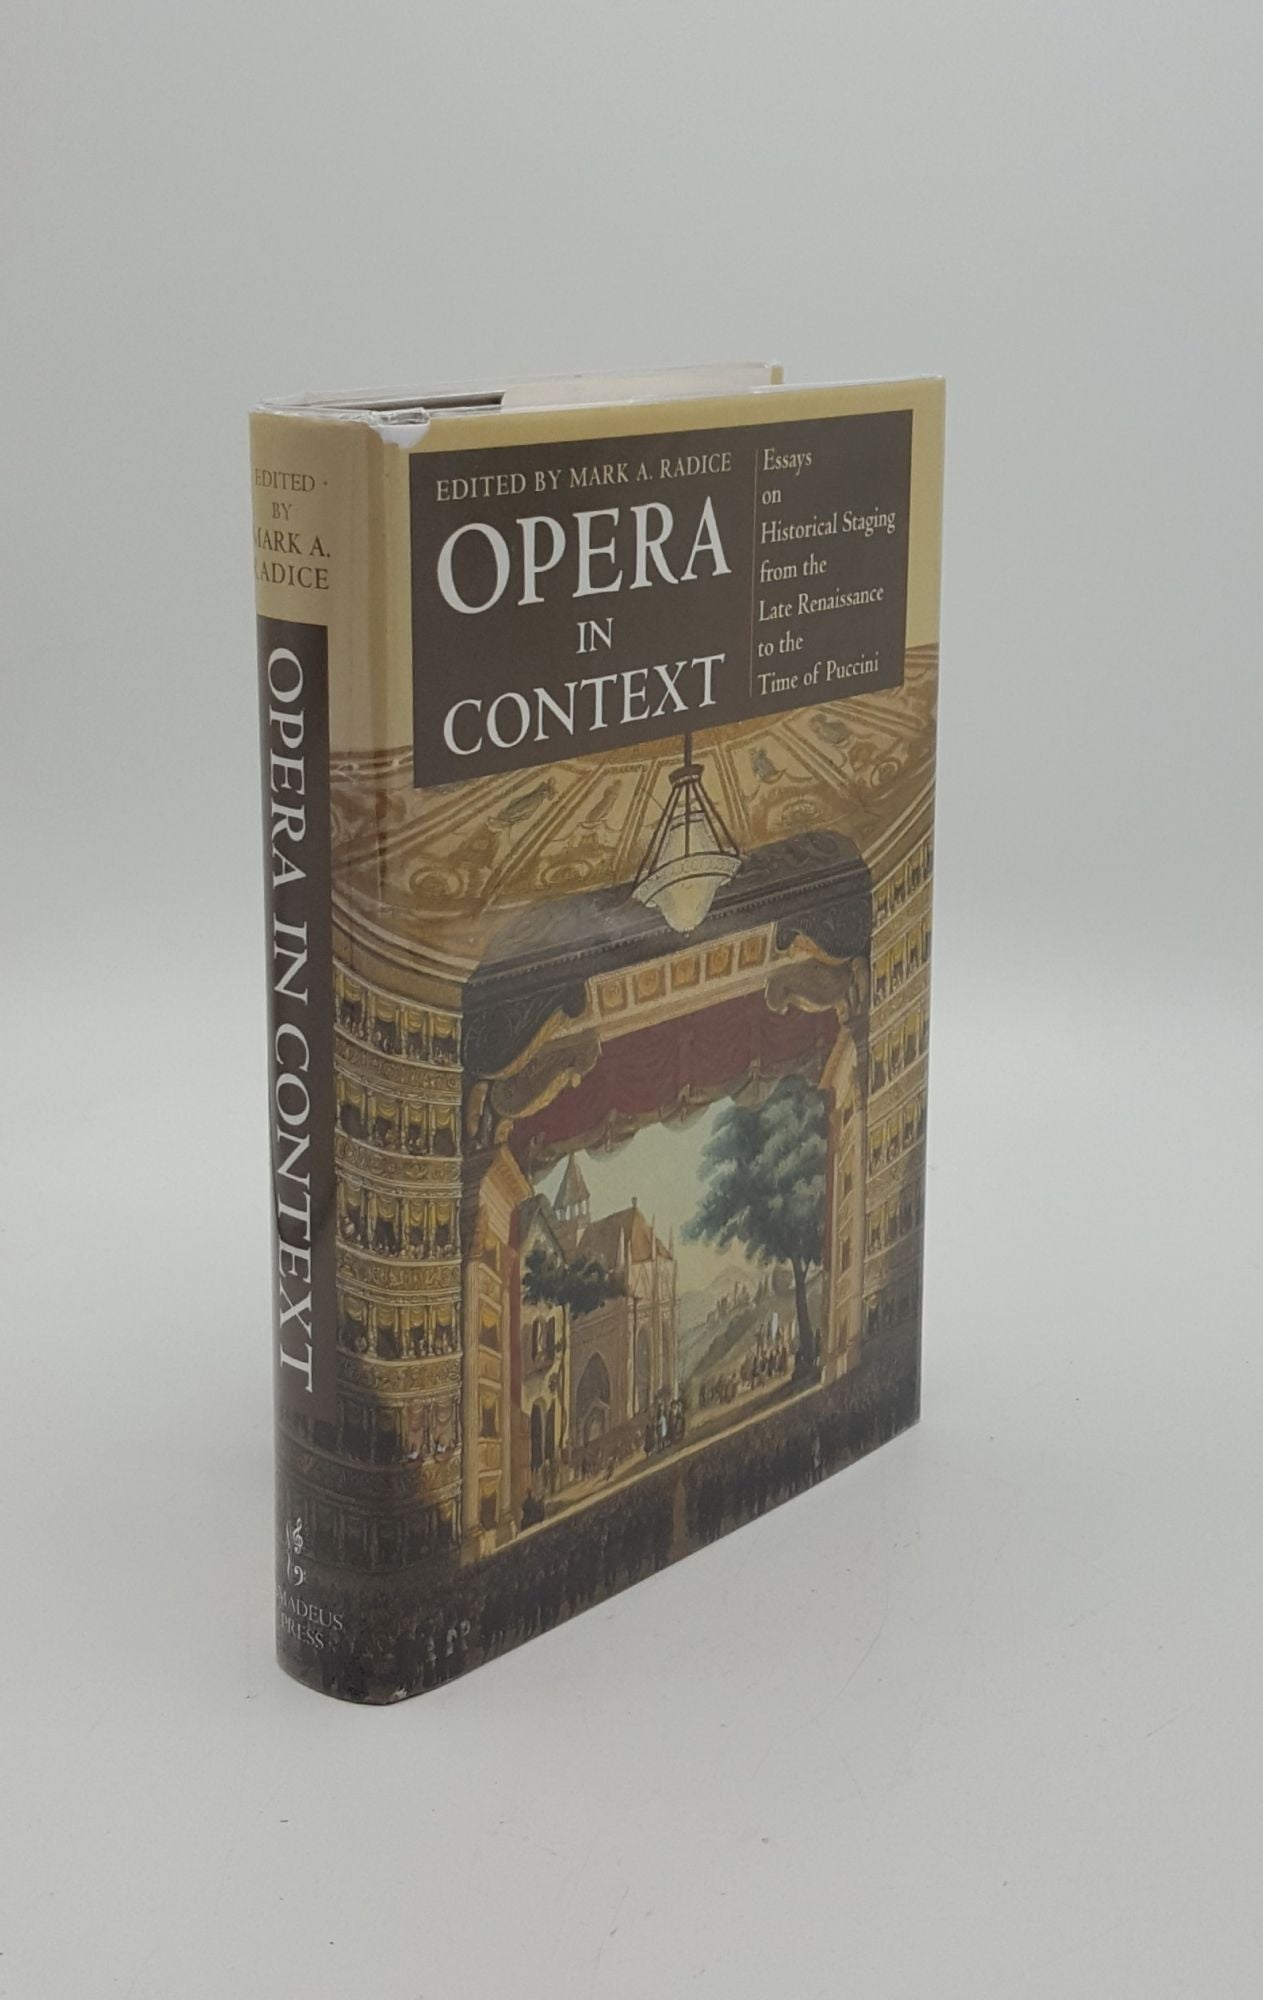 RADICE Mark A. - Opera in Context Essays on Historical Staging from the Late Renaissance to the Time of Puccini